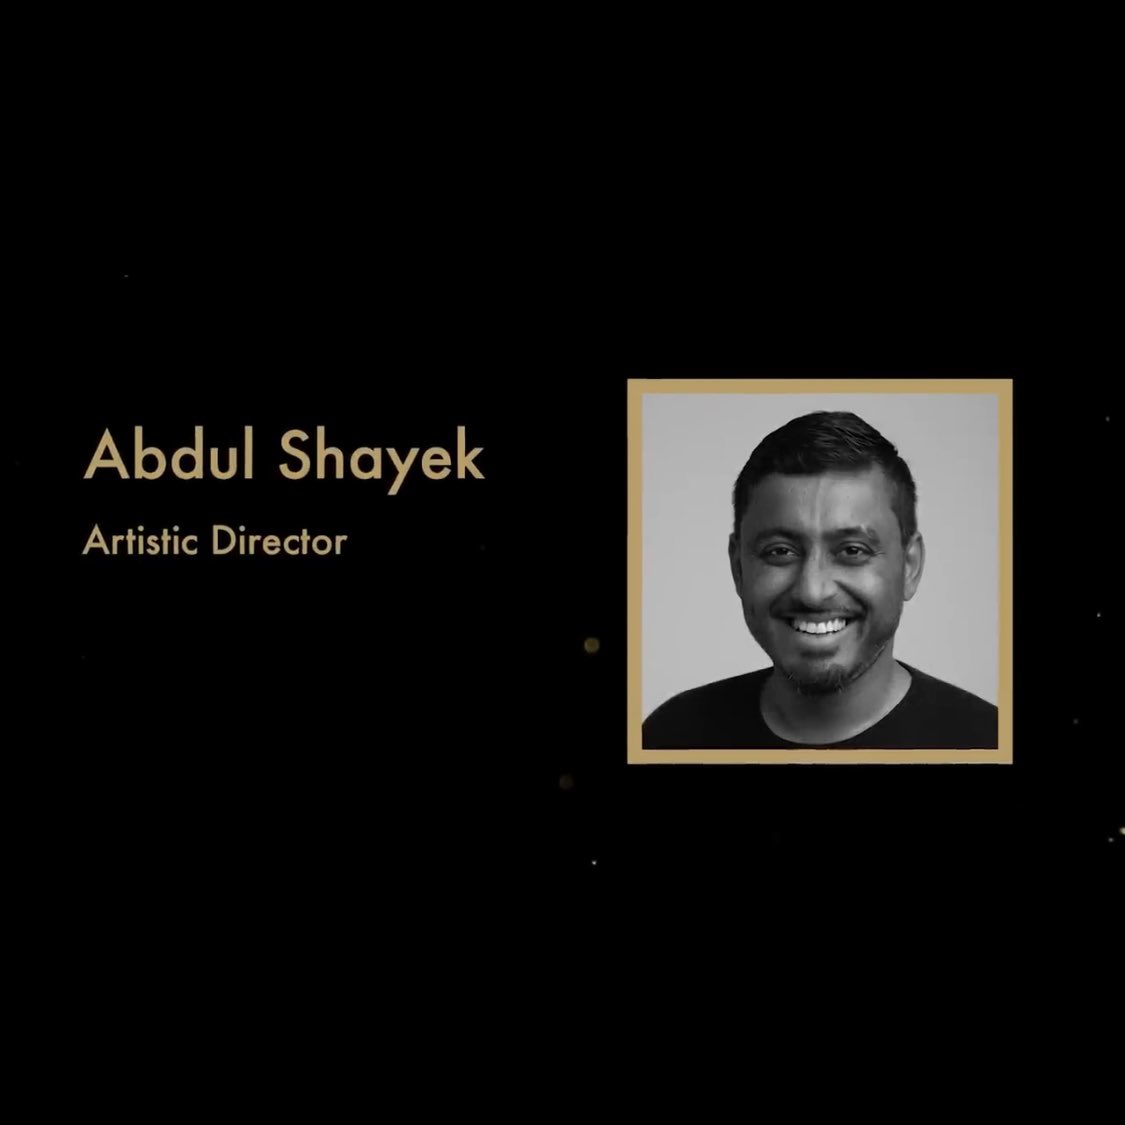 Thank you @OlivierAwards for honouring Abdul Shayek in memoriam alongside such a wealth of talent across this industry Sending our love to all those missing these titans of theatre ❤️